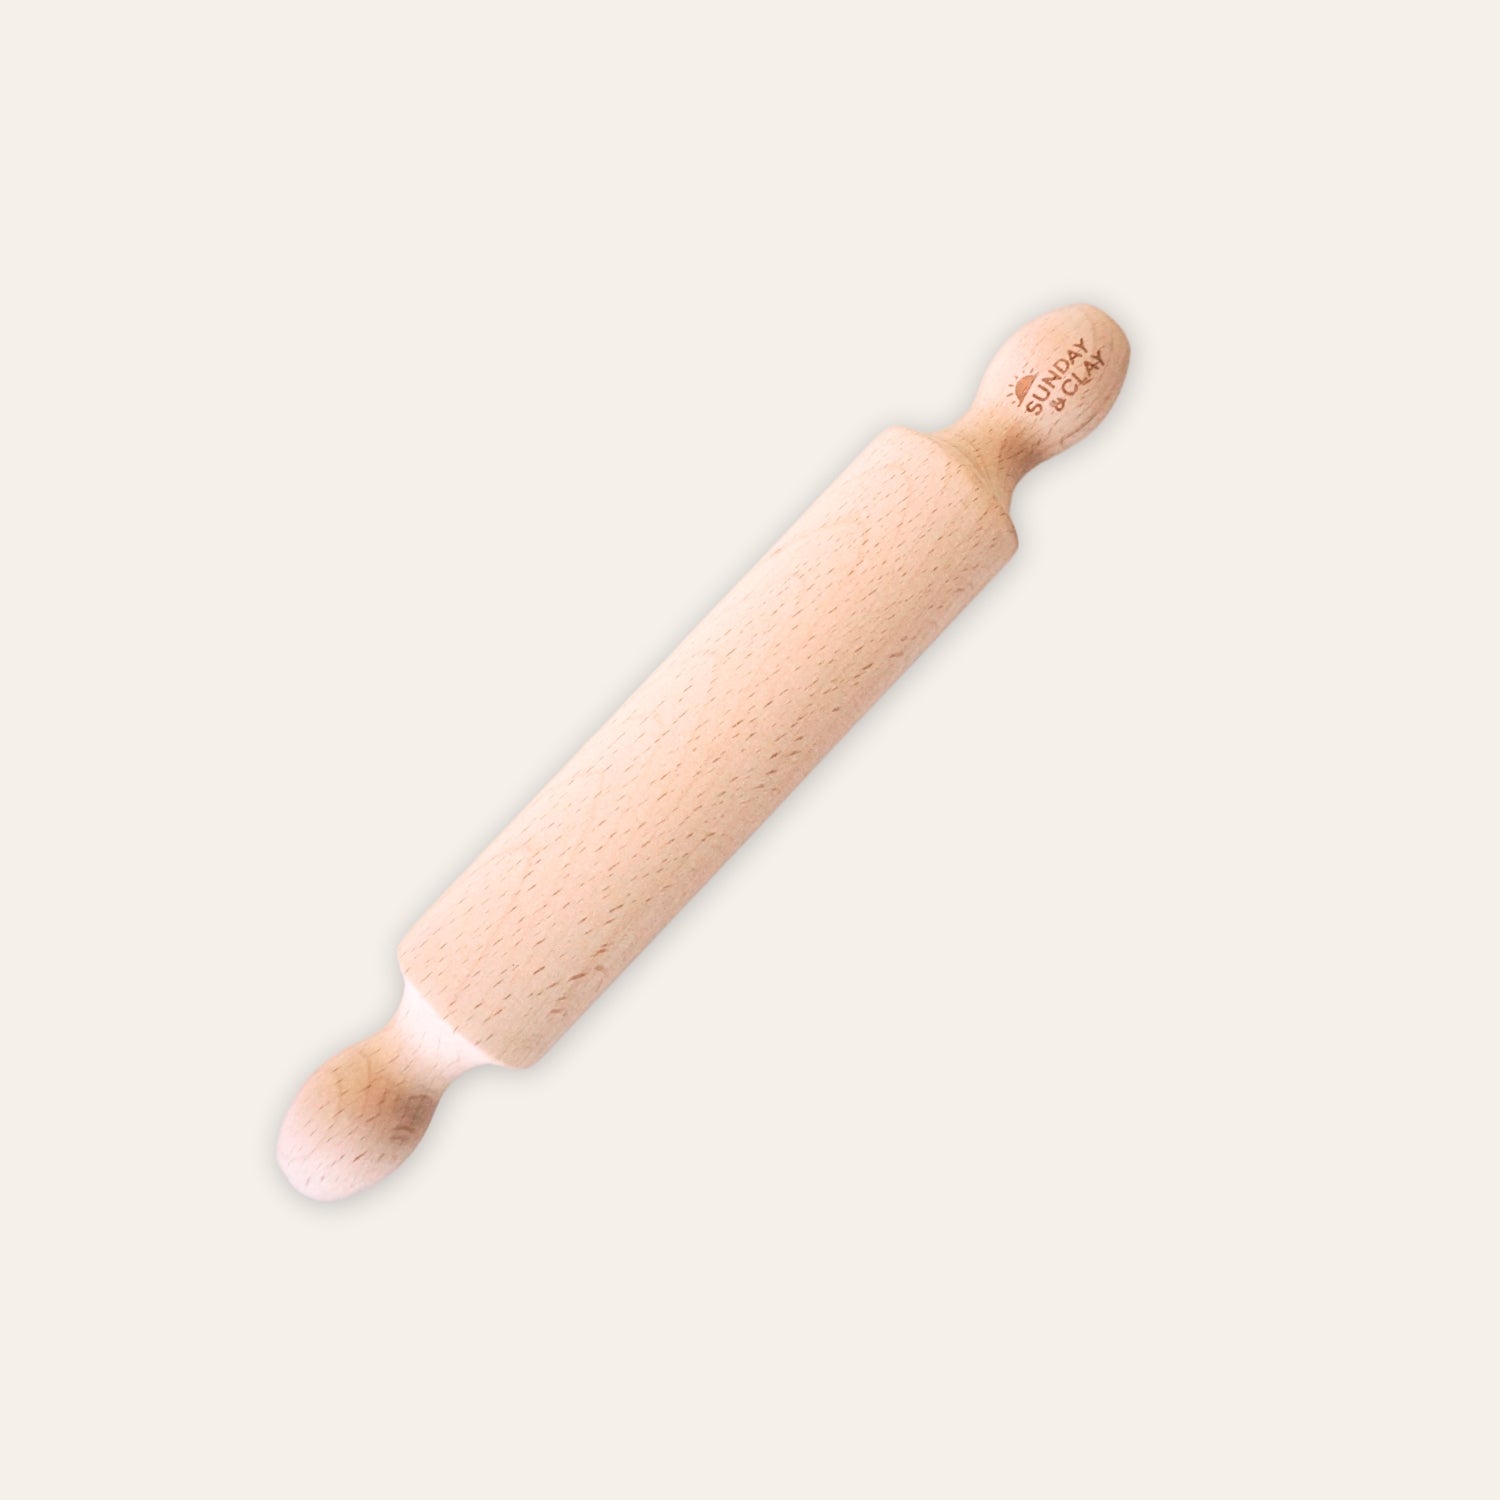 Clay rolling pin by Sunday & Clay.